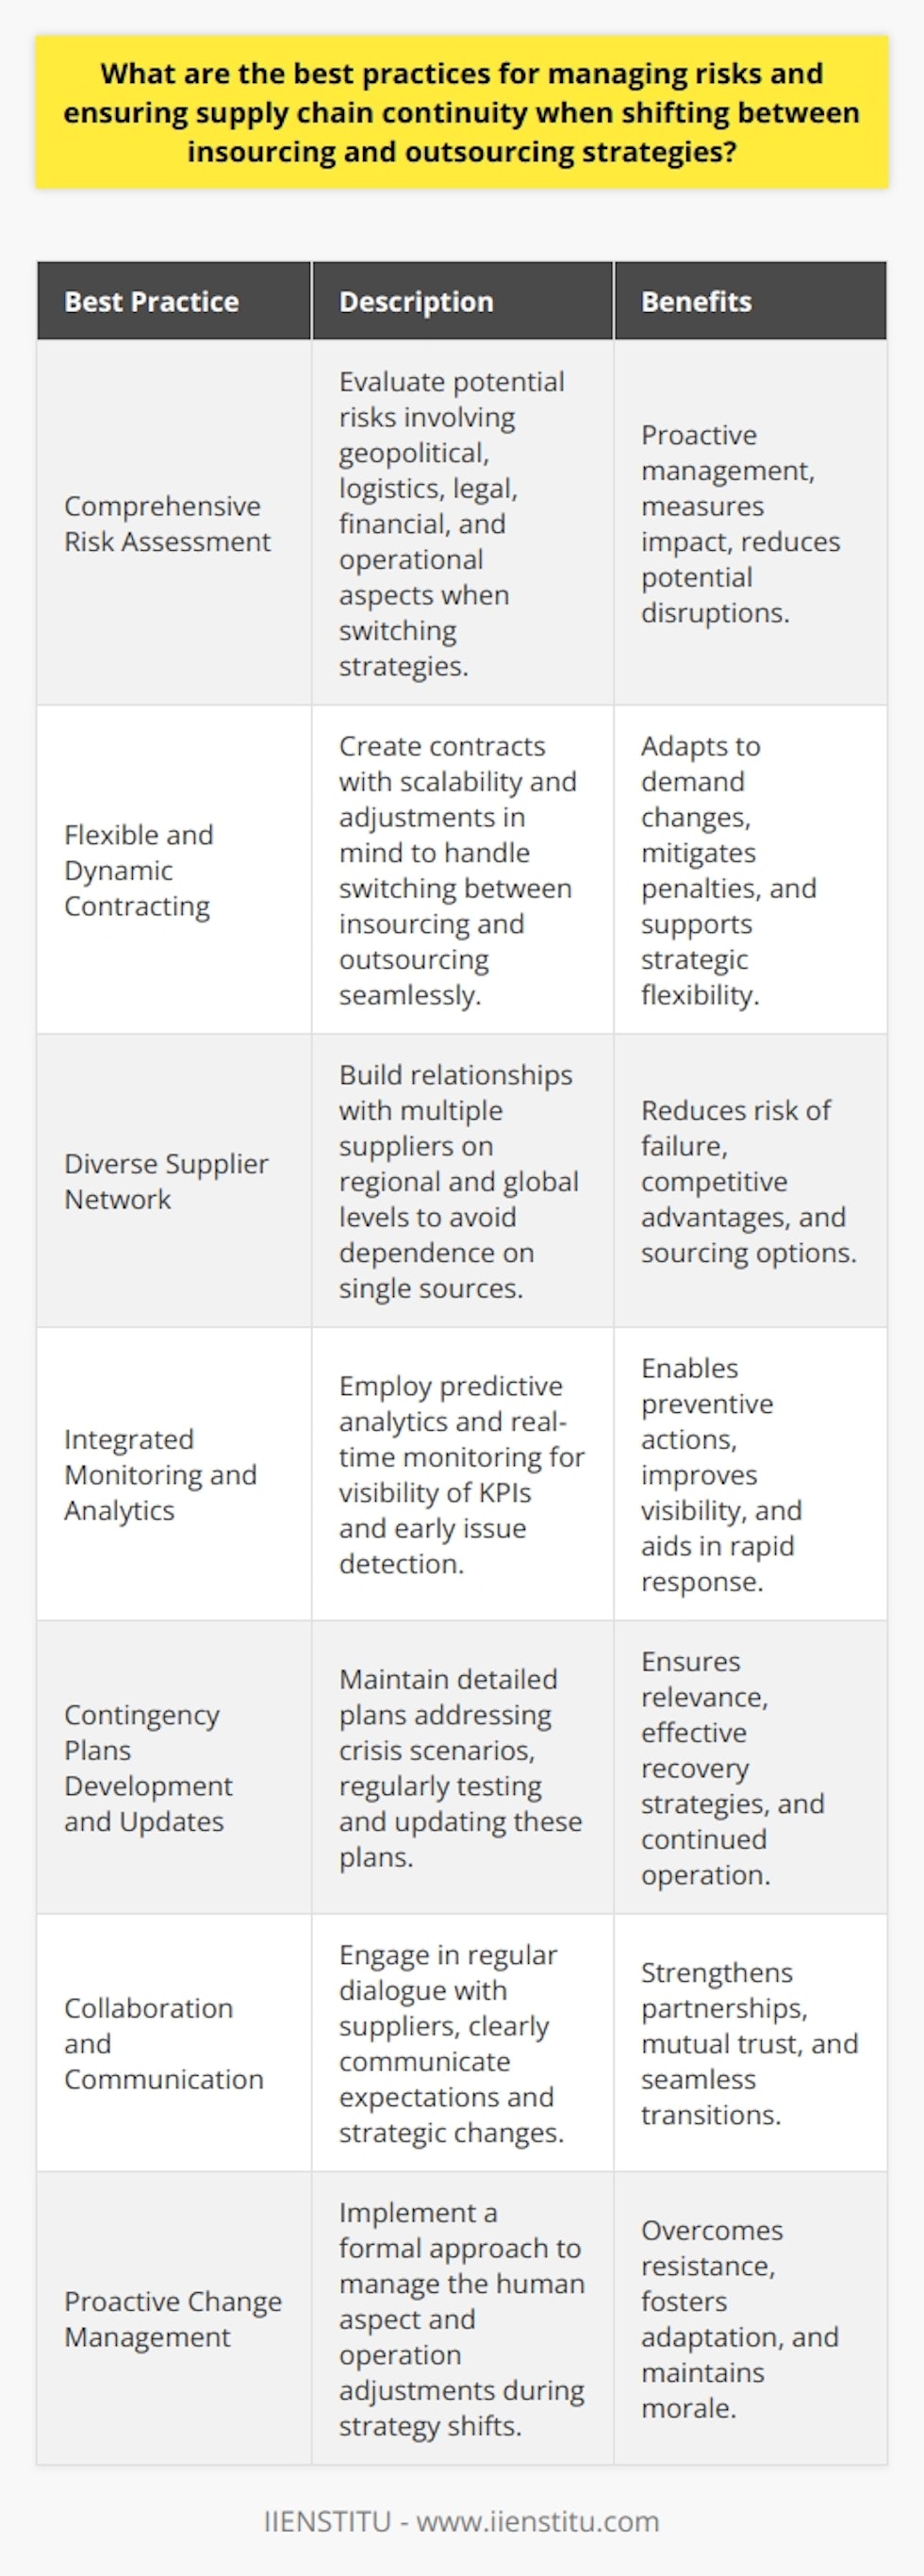 Creating a resilient and flexible supply chain capable of withstanding the ebbs and flows of market demands and strategic moves like insourcing and outsourcing is crucial for modern businesses. Here are some of the best practices for managing risks and ensuring supply chain continuity when shifting between such strategies:1. **Comprehensive Risk Assessment**   Start by having a clear understanding of the potential risks and the likelihood of their occurrence. Assess each element of the supply chain for vulnerabilities when switching strategies. Consider geopolitical factors, logistics, legal implications, financial stability, and other operational risks. The goal here is to measure the impact of these variables on supply chain continuity and be proactive in risk management.2. **Flexible and Dynamic Contracting**   Contracts should be designed to accommodate changes in supply chain strategies. They should be structured in a way that allows for scalability and adjustments without incurring prohibitive penalties or long-term hindrances. Keep terms as dynamic and responsive as possible to adapt to situations such as abrupt changes in demand or switching from an outsourced model to insourcing.3. **Diverse Supplier Network**   Cultivate relationships with multiple suppliers both regionally and globally. Diversification helps to cushion the supply chain from becoming too dependent on any single source that could become a single point of failure. Moreover, a diverse supplier base can offer competitive advantages and a mix of insourcing and outsourcing options.4. **Integrated Monitoring and Analytics**   Today’s supply chain networks benefit greatly from predictive analytics and real-time monitoring tools. Implement technology solutions that provide visibility and tracking of key performance indicators (KPIs) across the supply chain. This allows for early detection of issues that could disrupt continuity, enabling preventive measures to be taken.5. **Develop and Regularly Update Contingency Plans**   A robust contingency plan is an integral part of supply chain resilience. These plans should be detailed, addressing various crisis scenarios, and provide clear guidance on the steps to take to ensure continuity or recovery. Regular testing and updating of these plans are essential, as they ensure that the plan remains relevant to the current operating context and risk landscape.6. **Collaboration and Communication**   Effective supplier relationships are built on strong collaboration and clear communication. Regular dialogue with suppliers and clear communication of expectations and strategic changes will strengthen partnership bonds and engender mutual trust. Keeping all stakeholders informed facilitates a smoother transition between insourcing and outsourcing scenarios.7. **Proactive Change Management**   The shift between insourcing and outsourcing affects multiple departments and stakeholders. A formal change management approach is necessary to manage the human element, cultural impacts, and operations adjustments effectively. Training programs, open communication channels, and a supportive environment for feedback are critical for overcoming resistance and apprehension during such transformations.Adopting these practices can greatly enhance an organization's ability to pivot efficiently and effectively between insourcing and outsourcing, maintaining a robust and responsive supply chain amid the uncertainties of today's business environment. Additionally, organizations like IIENSTITU provide educational resources to refine professionals' skills in managing such strategic supply chain decisions and ensuring resilience in a rapidly changing economic landscape.